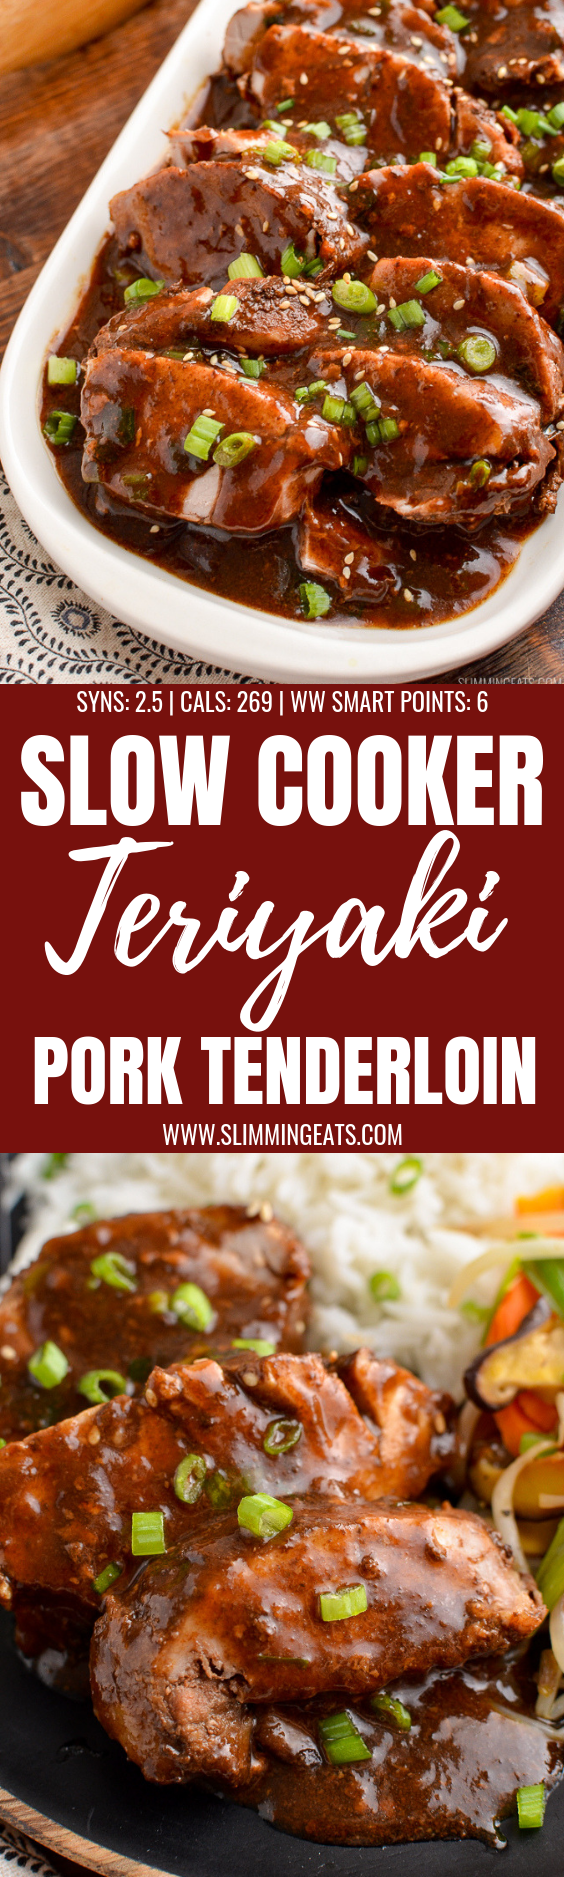 Tender Slow Cooked Teriyaki Pork Tenderloin a easy throw in the slow cooker low syn meal that is perfect for the whole family. | gluten free, dairy free, slow cooker, Slimming World and Weight Watchers friendly #weightwatchers #slowcooker #slimmingworld #teriyaki